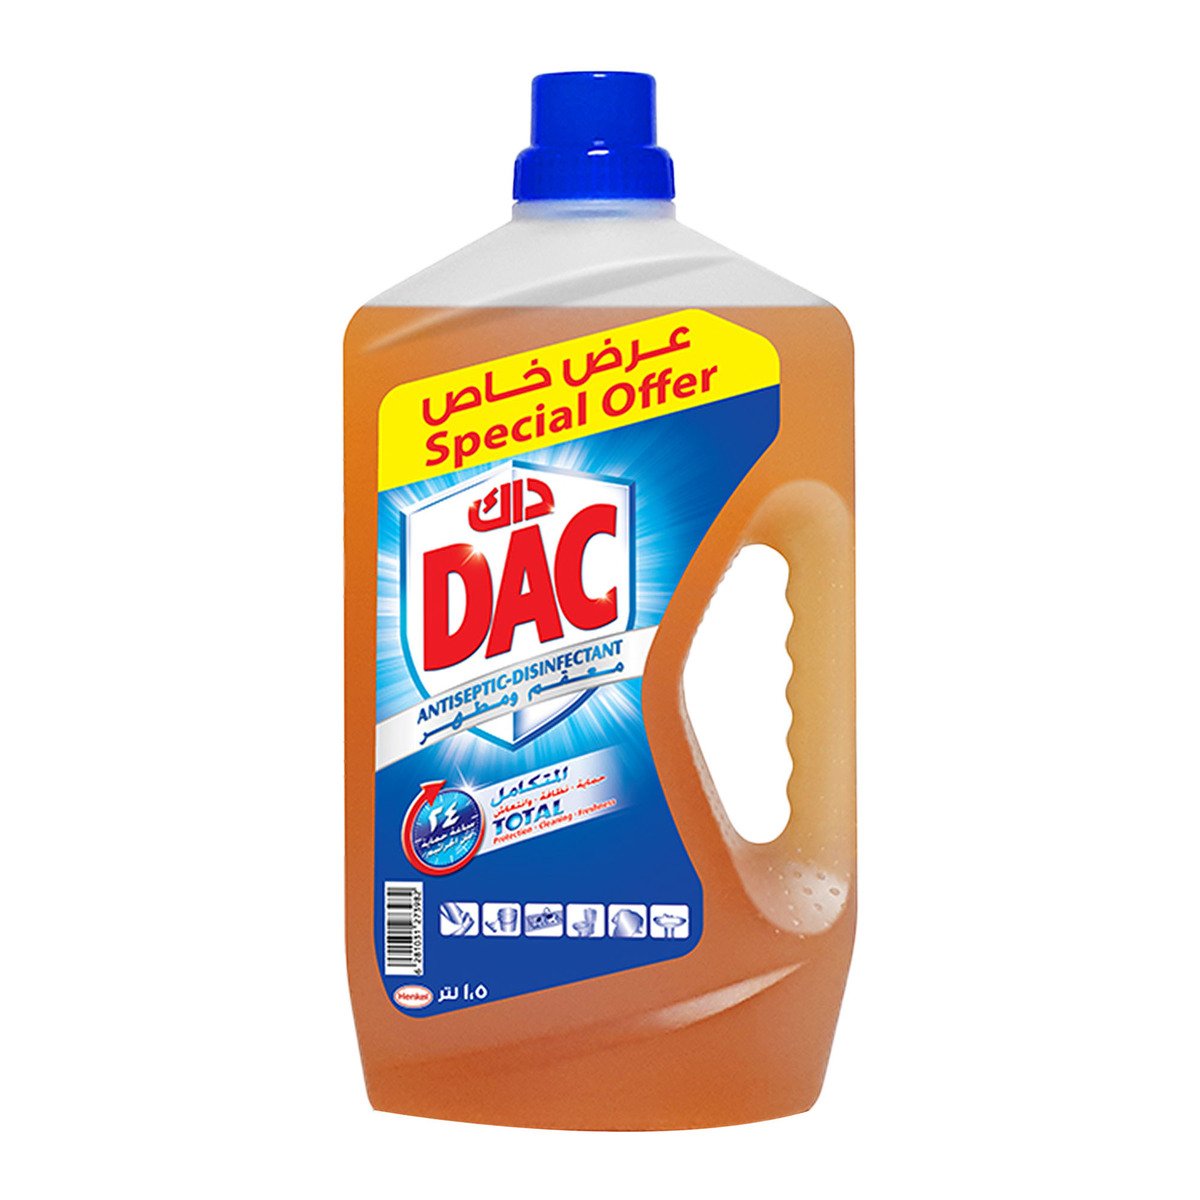 Dac Antiseptic Disinfectant 1.5 Litres